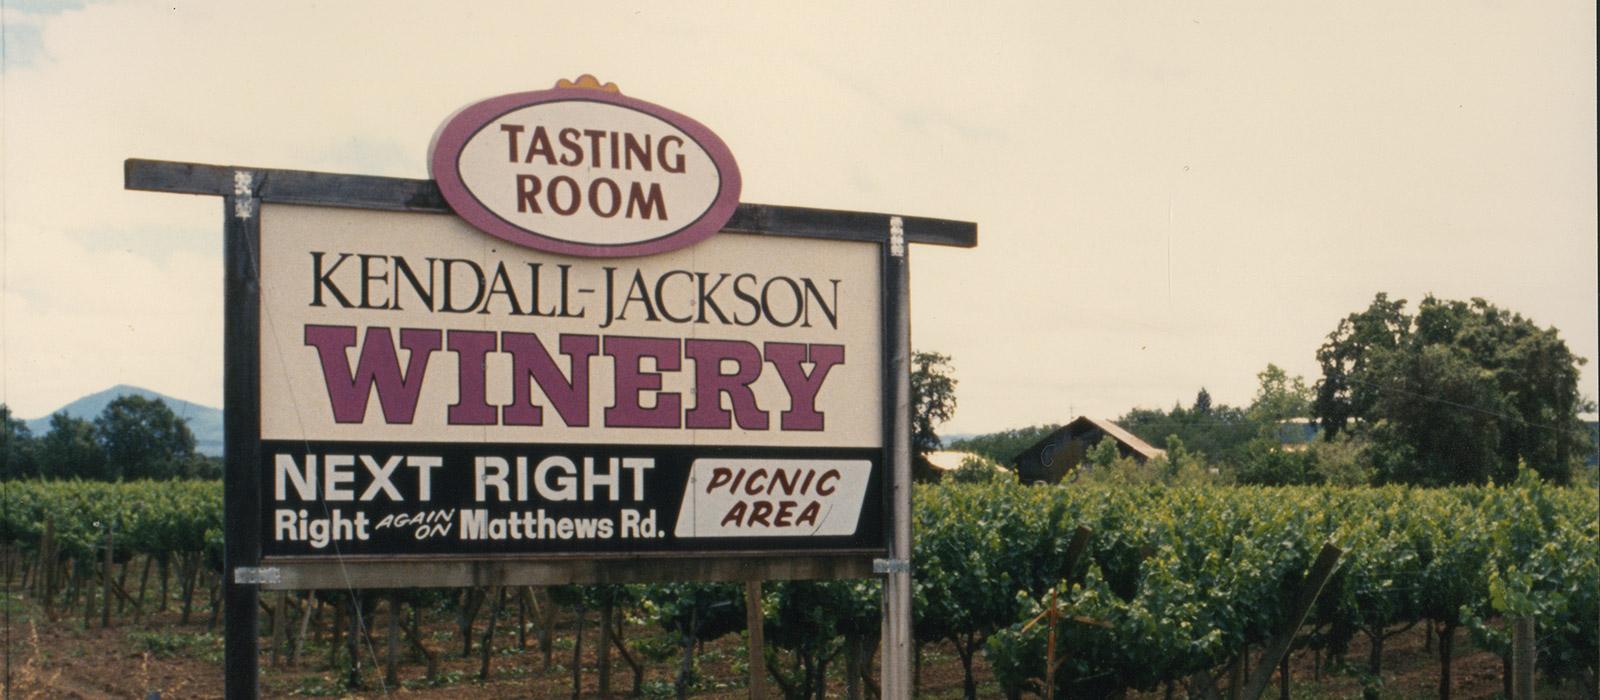 The History of Kendall-Jackson Wines